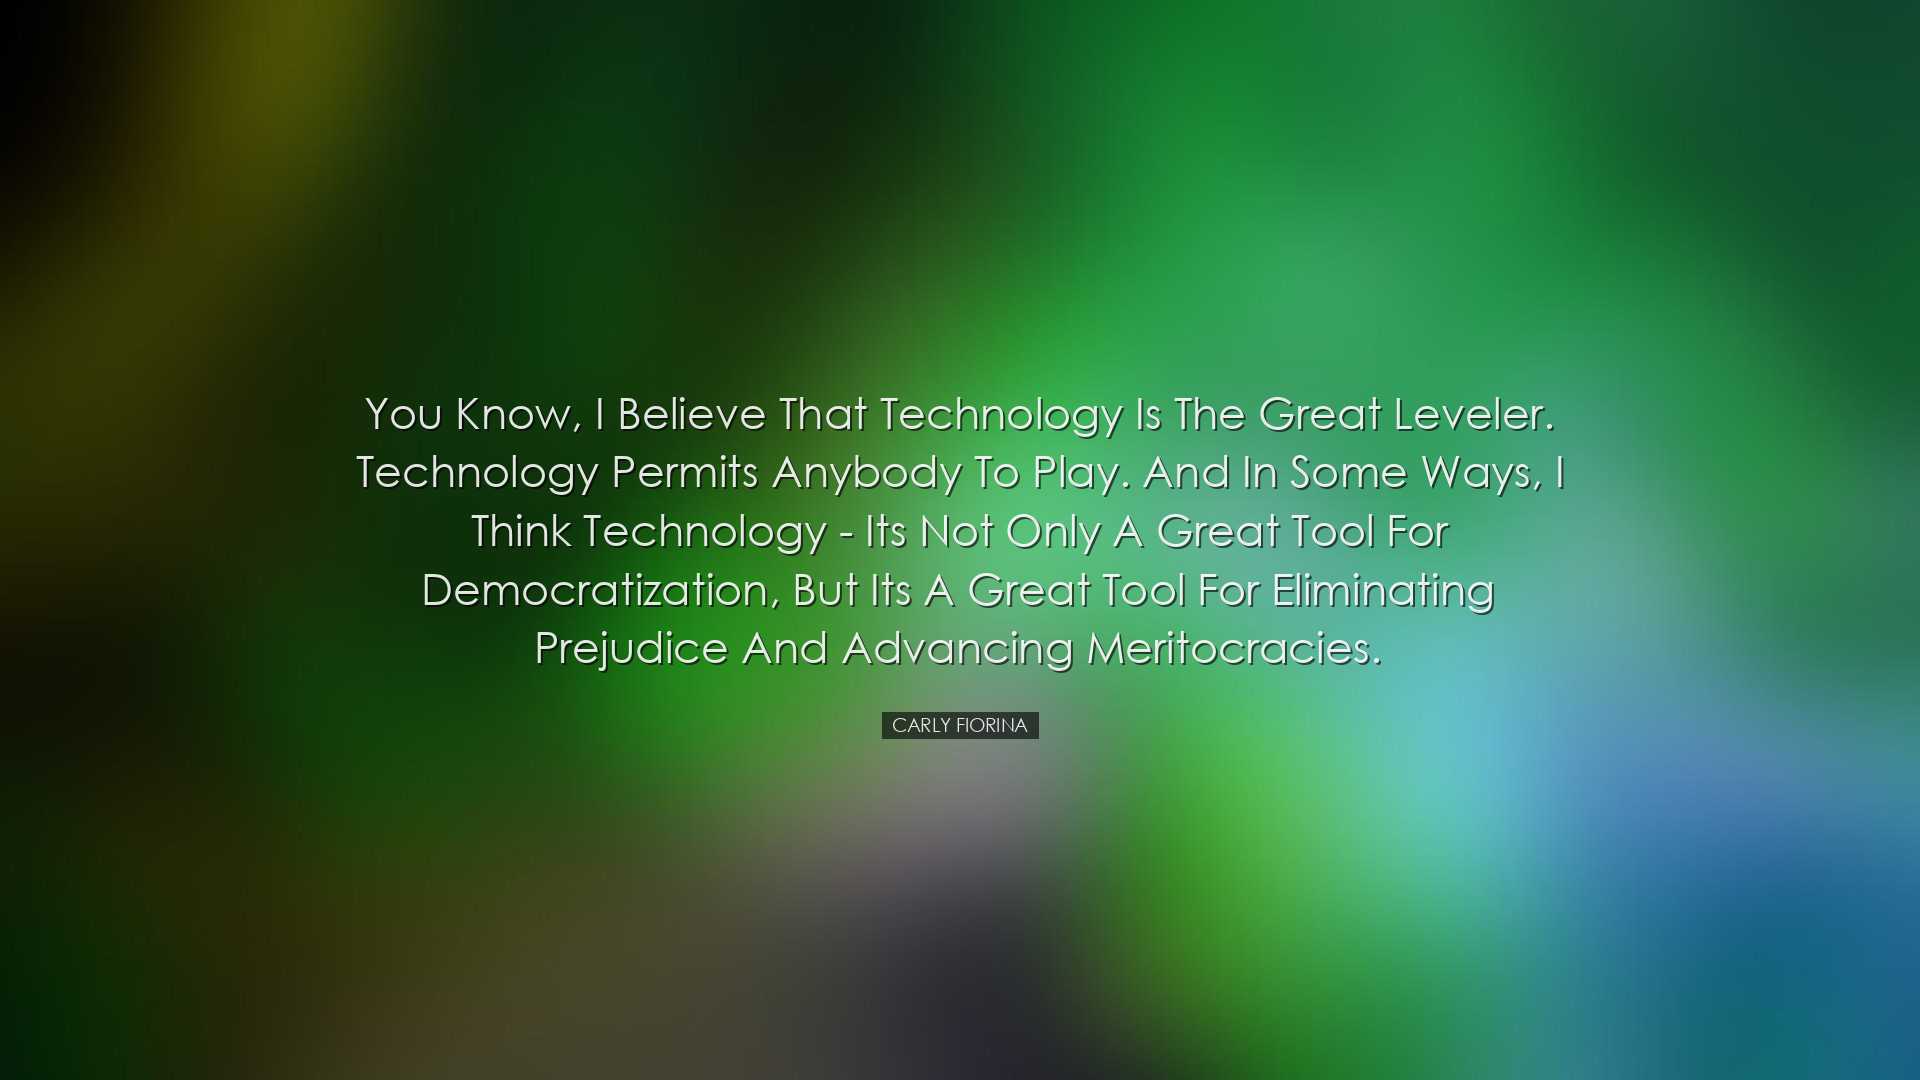 You know, I believe that technology is the great leveler. Technolo